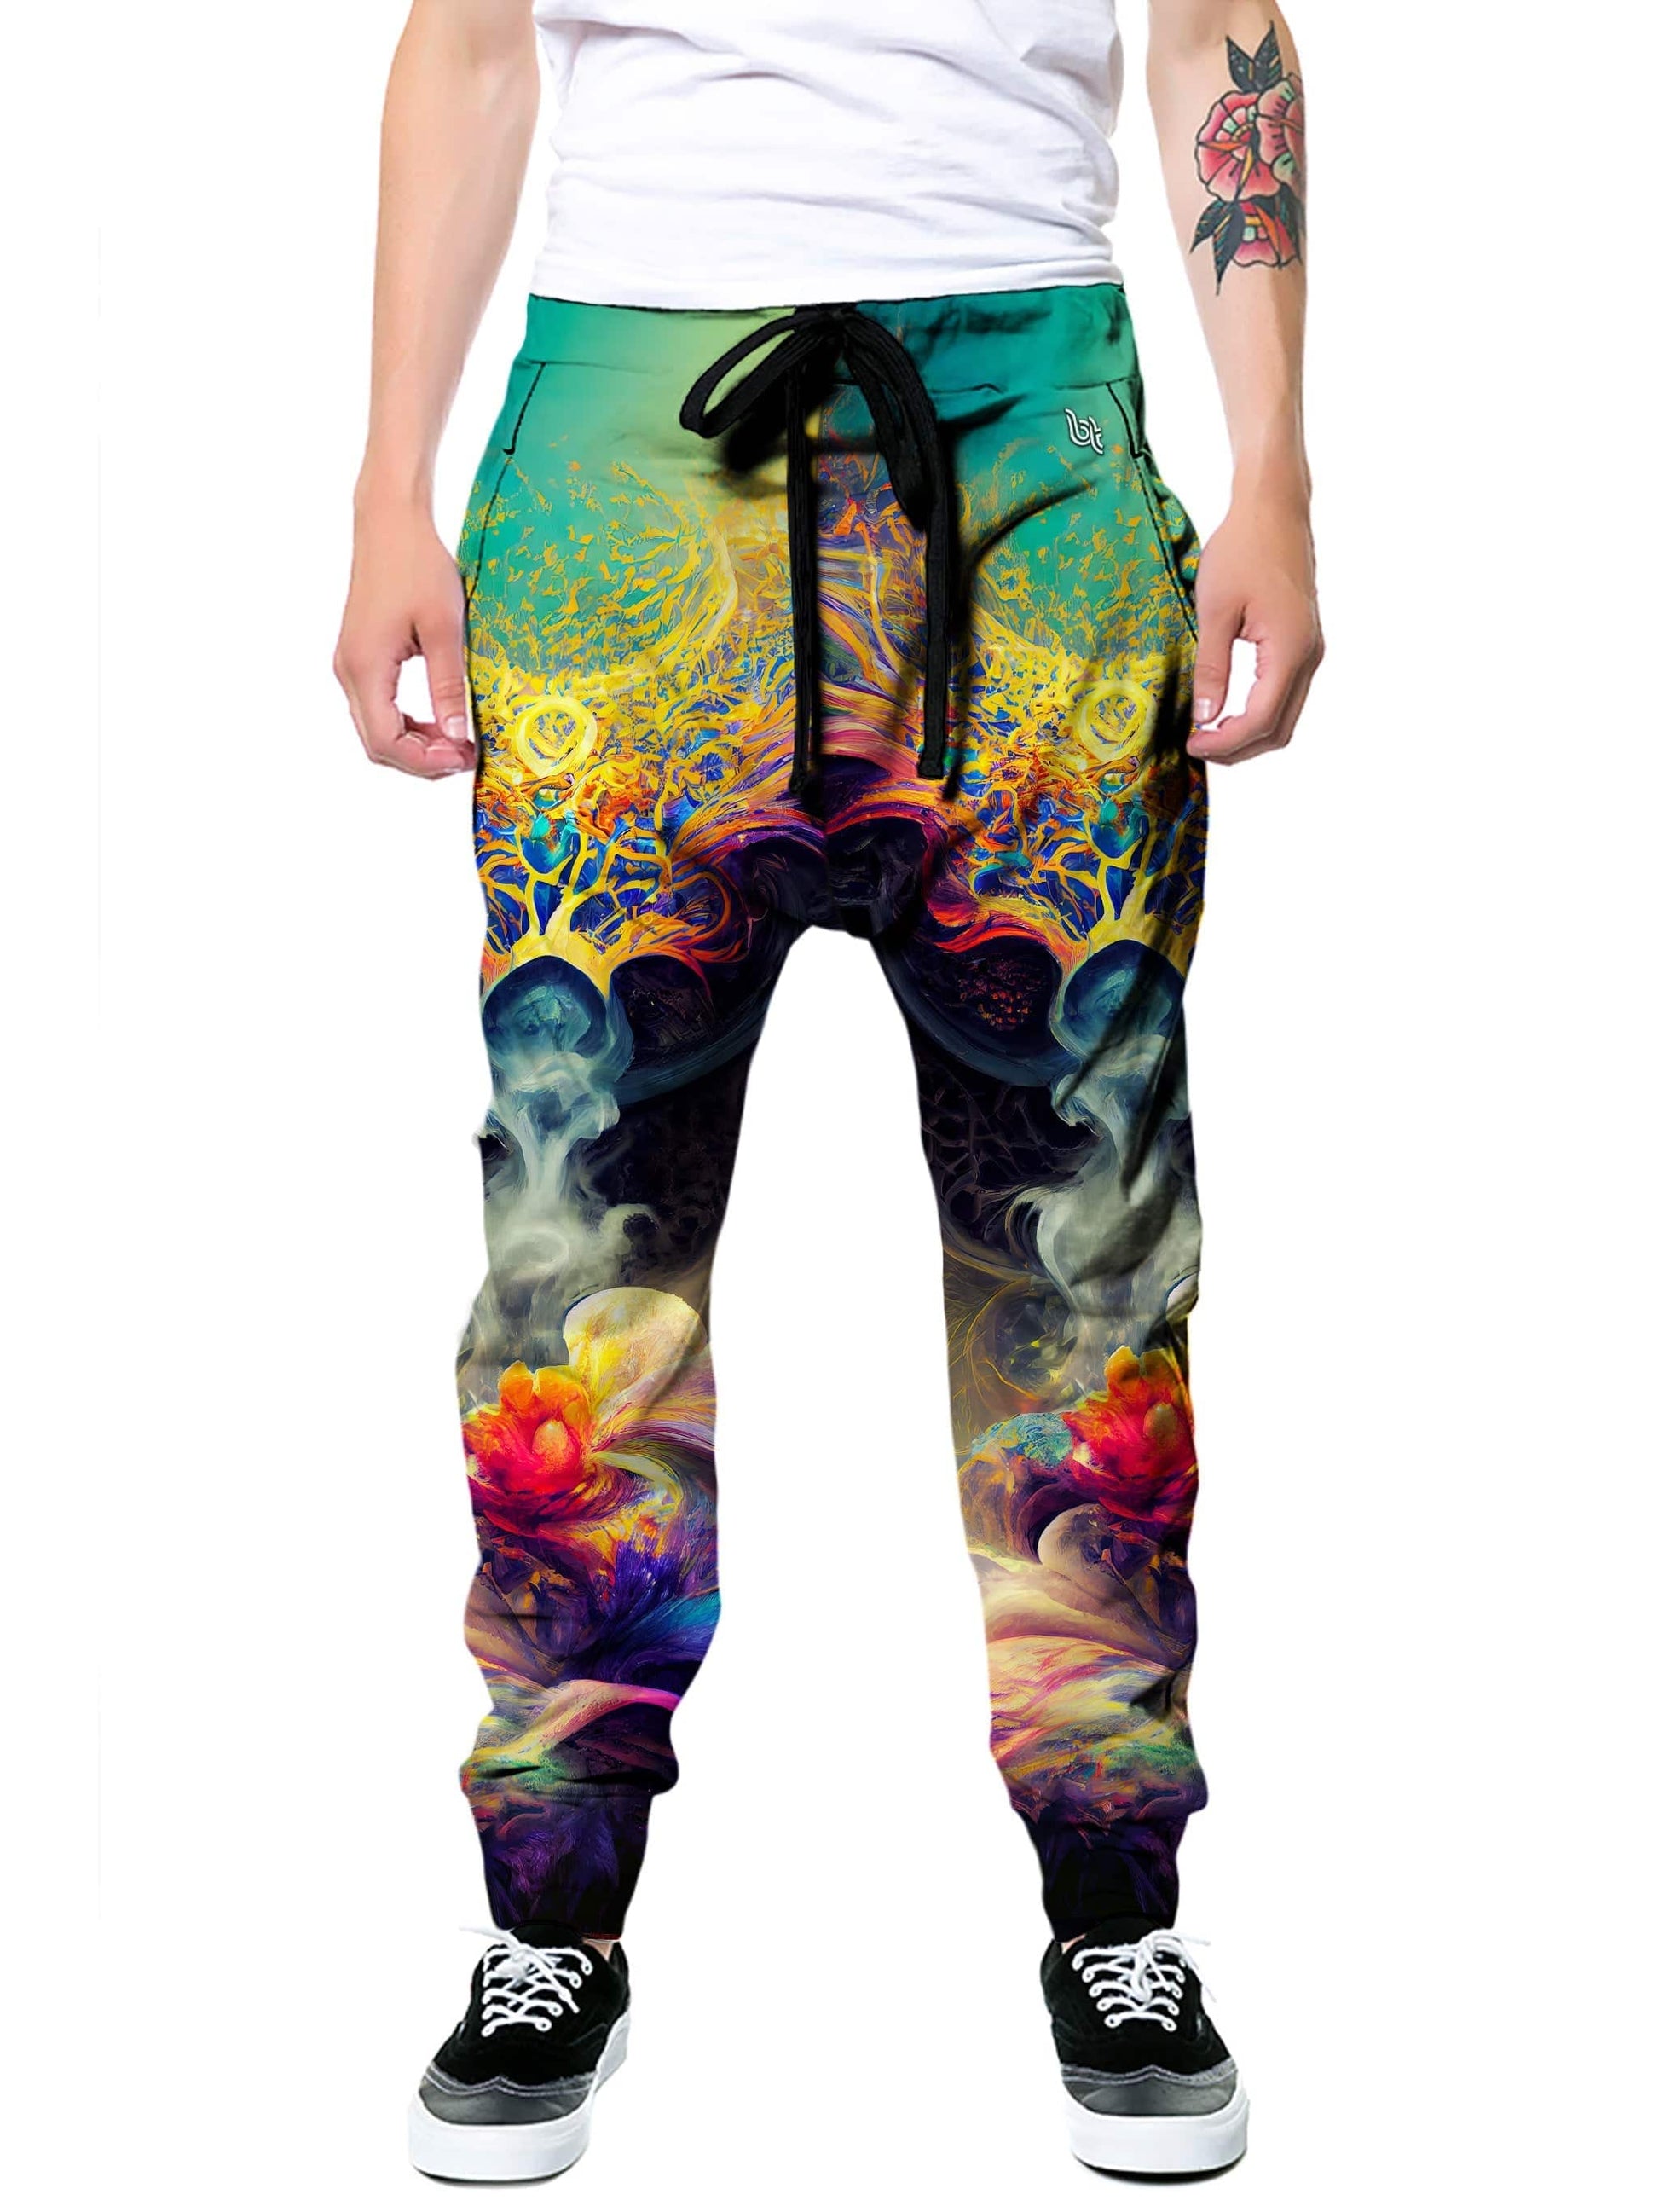 Moment Joggers, Gratefully Dyed, | iEDM